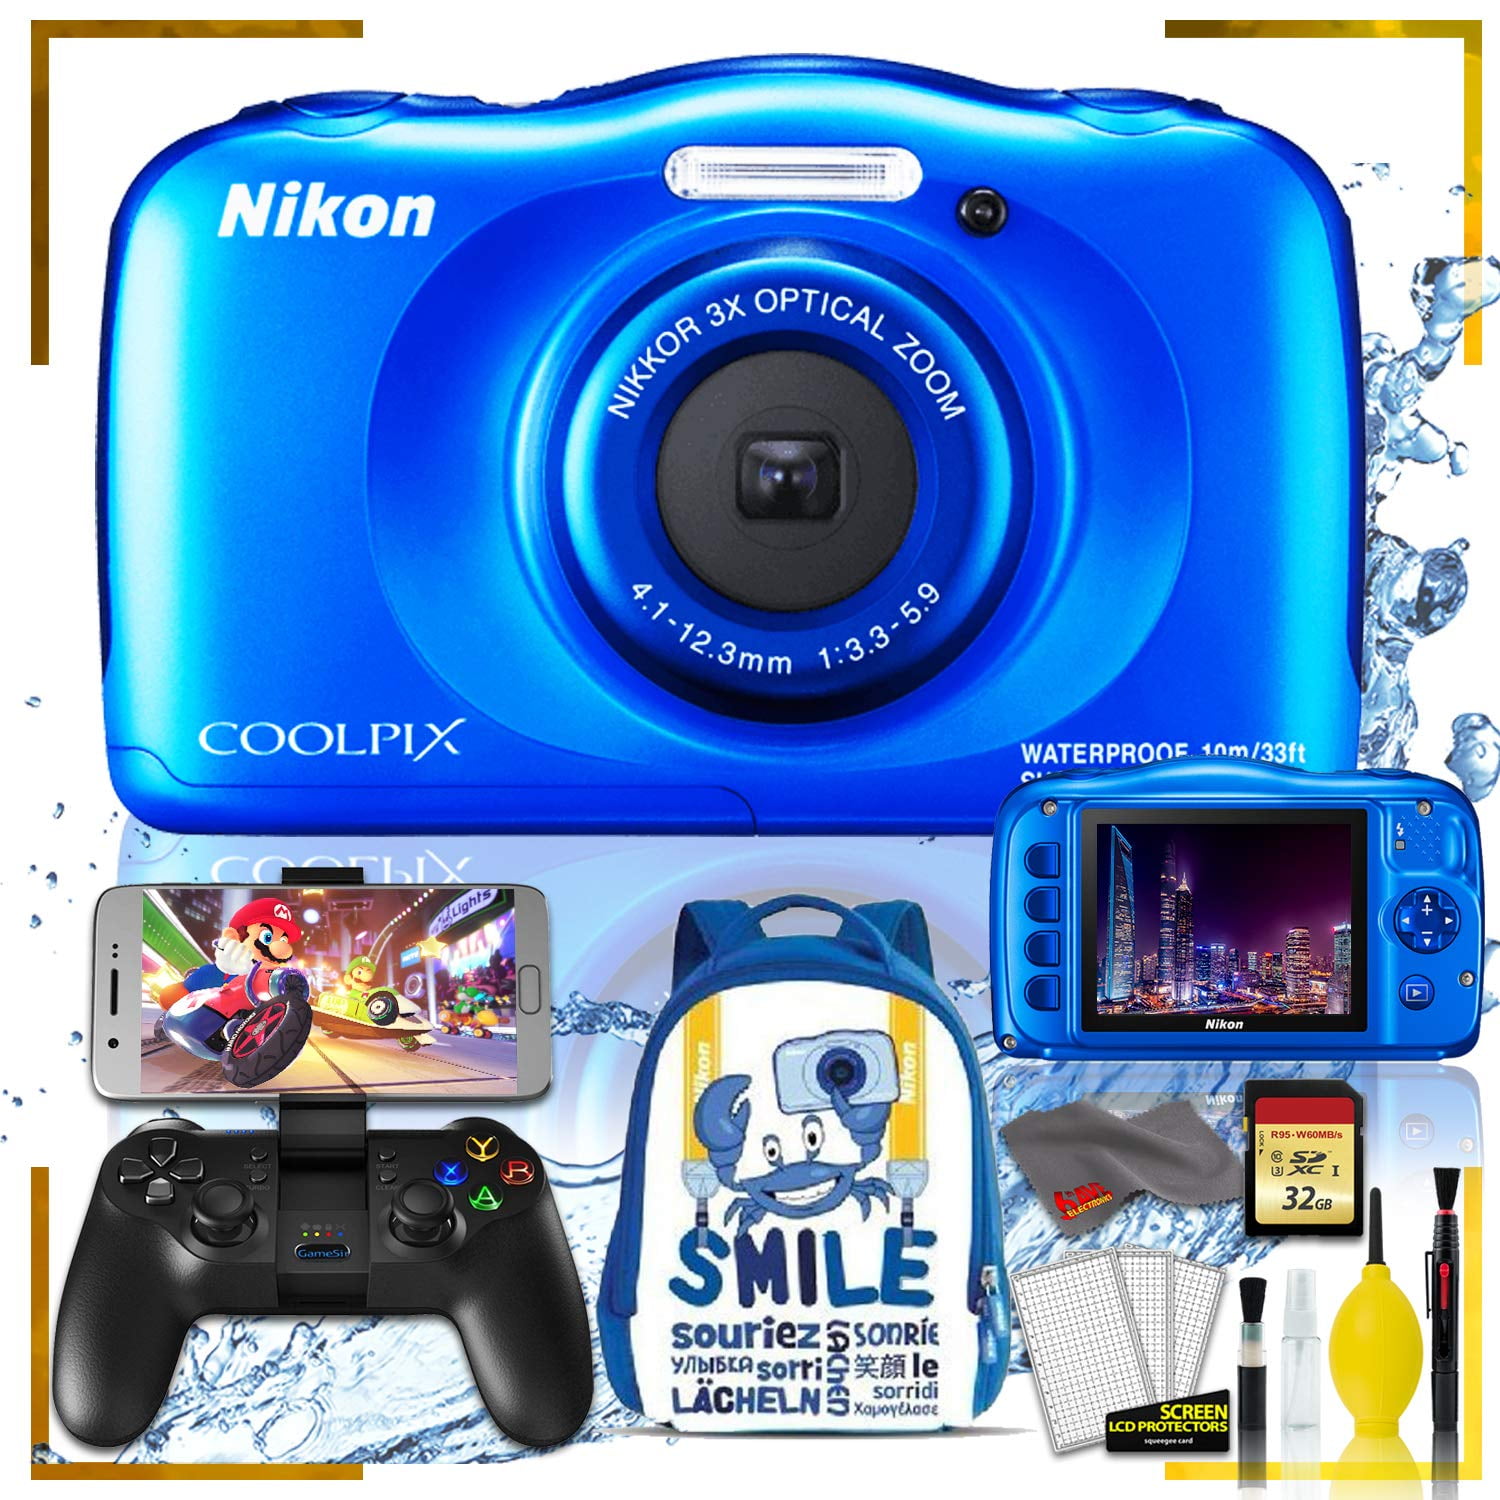 Nikon Coolpix W150 Digital Camera - Blue (Intl Model) with Camera Cleaning  Kit Bundle + Game Sir T1s Gaming Controller for Mobile + 32gb SD Card + 